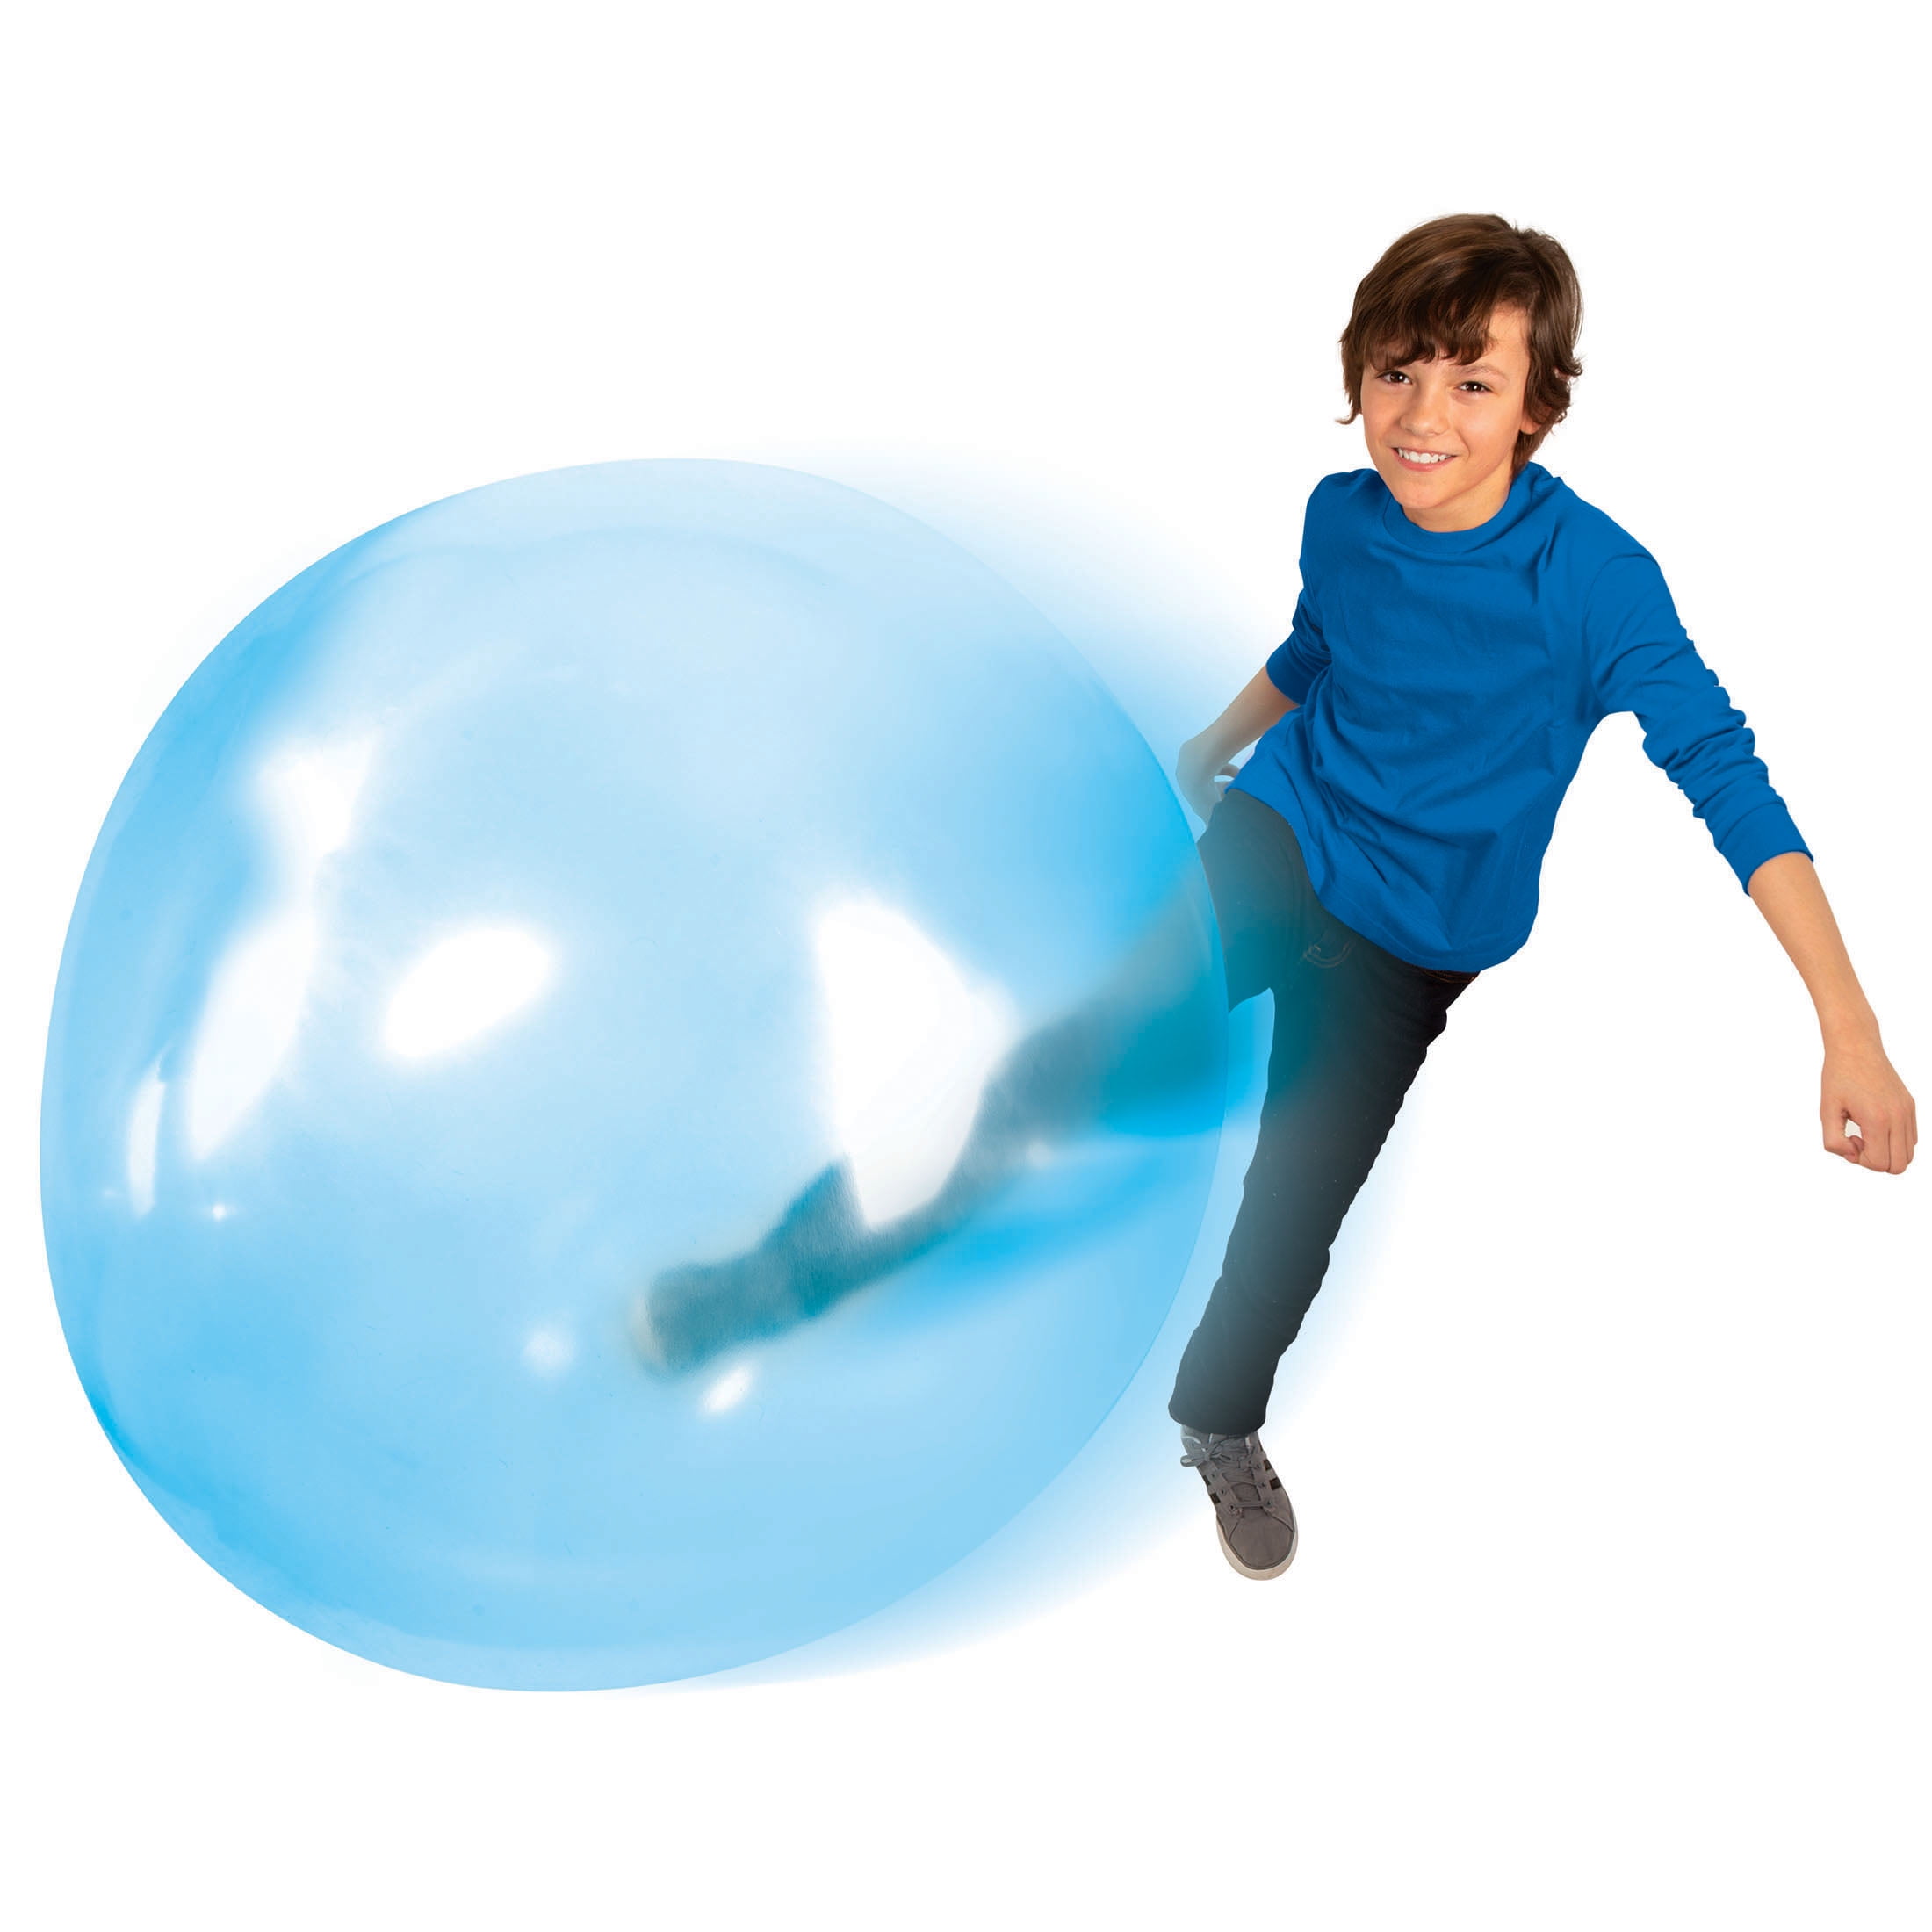 Super Wubble Bubble Ball With Pump Indoor Outdoor 80891 for sale online 